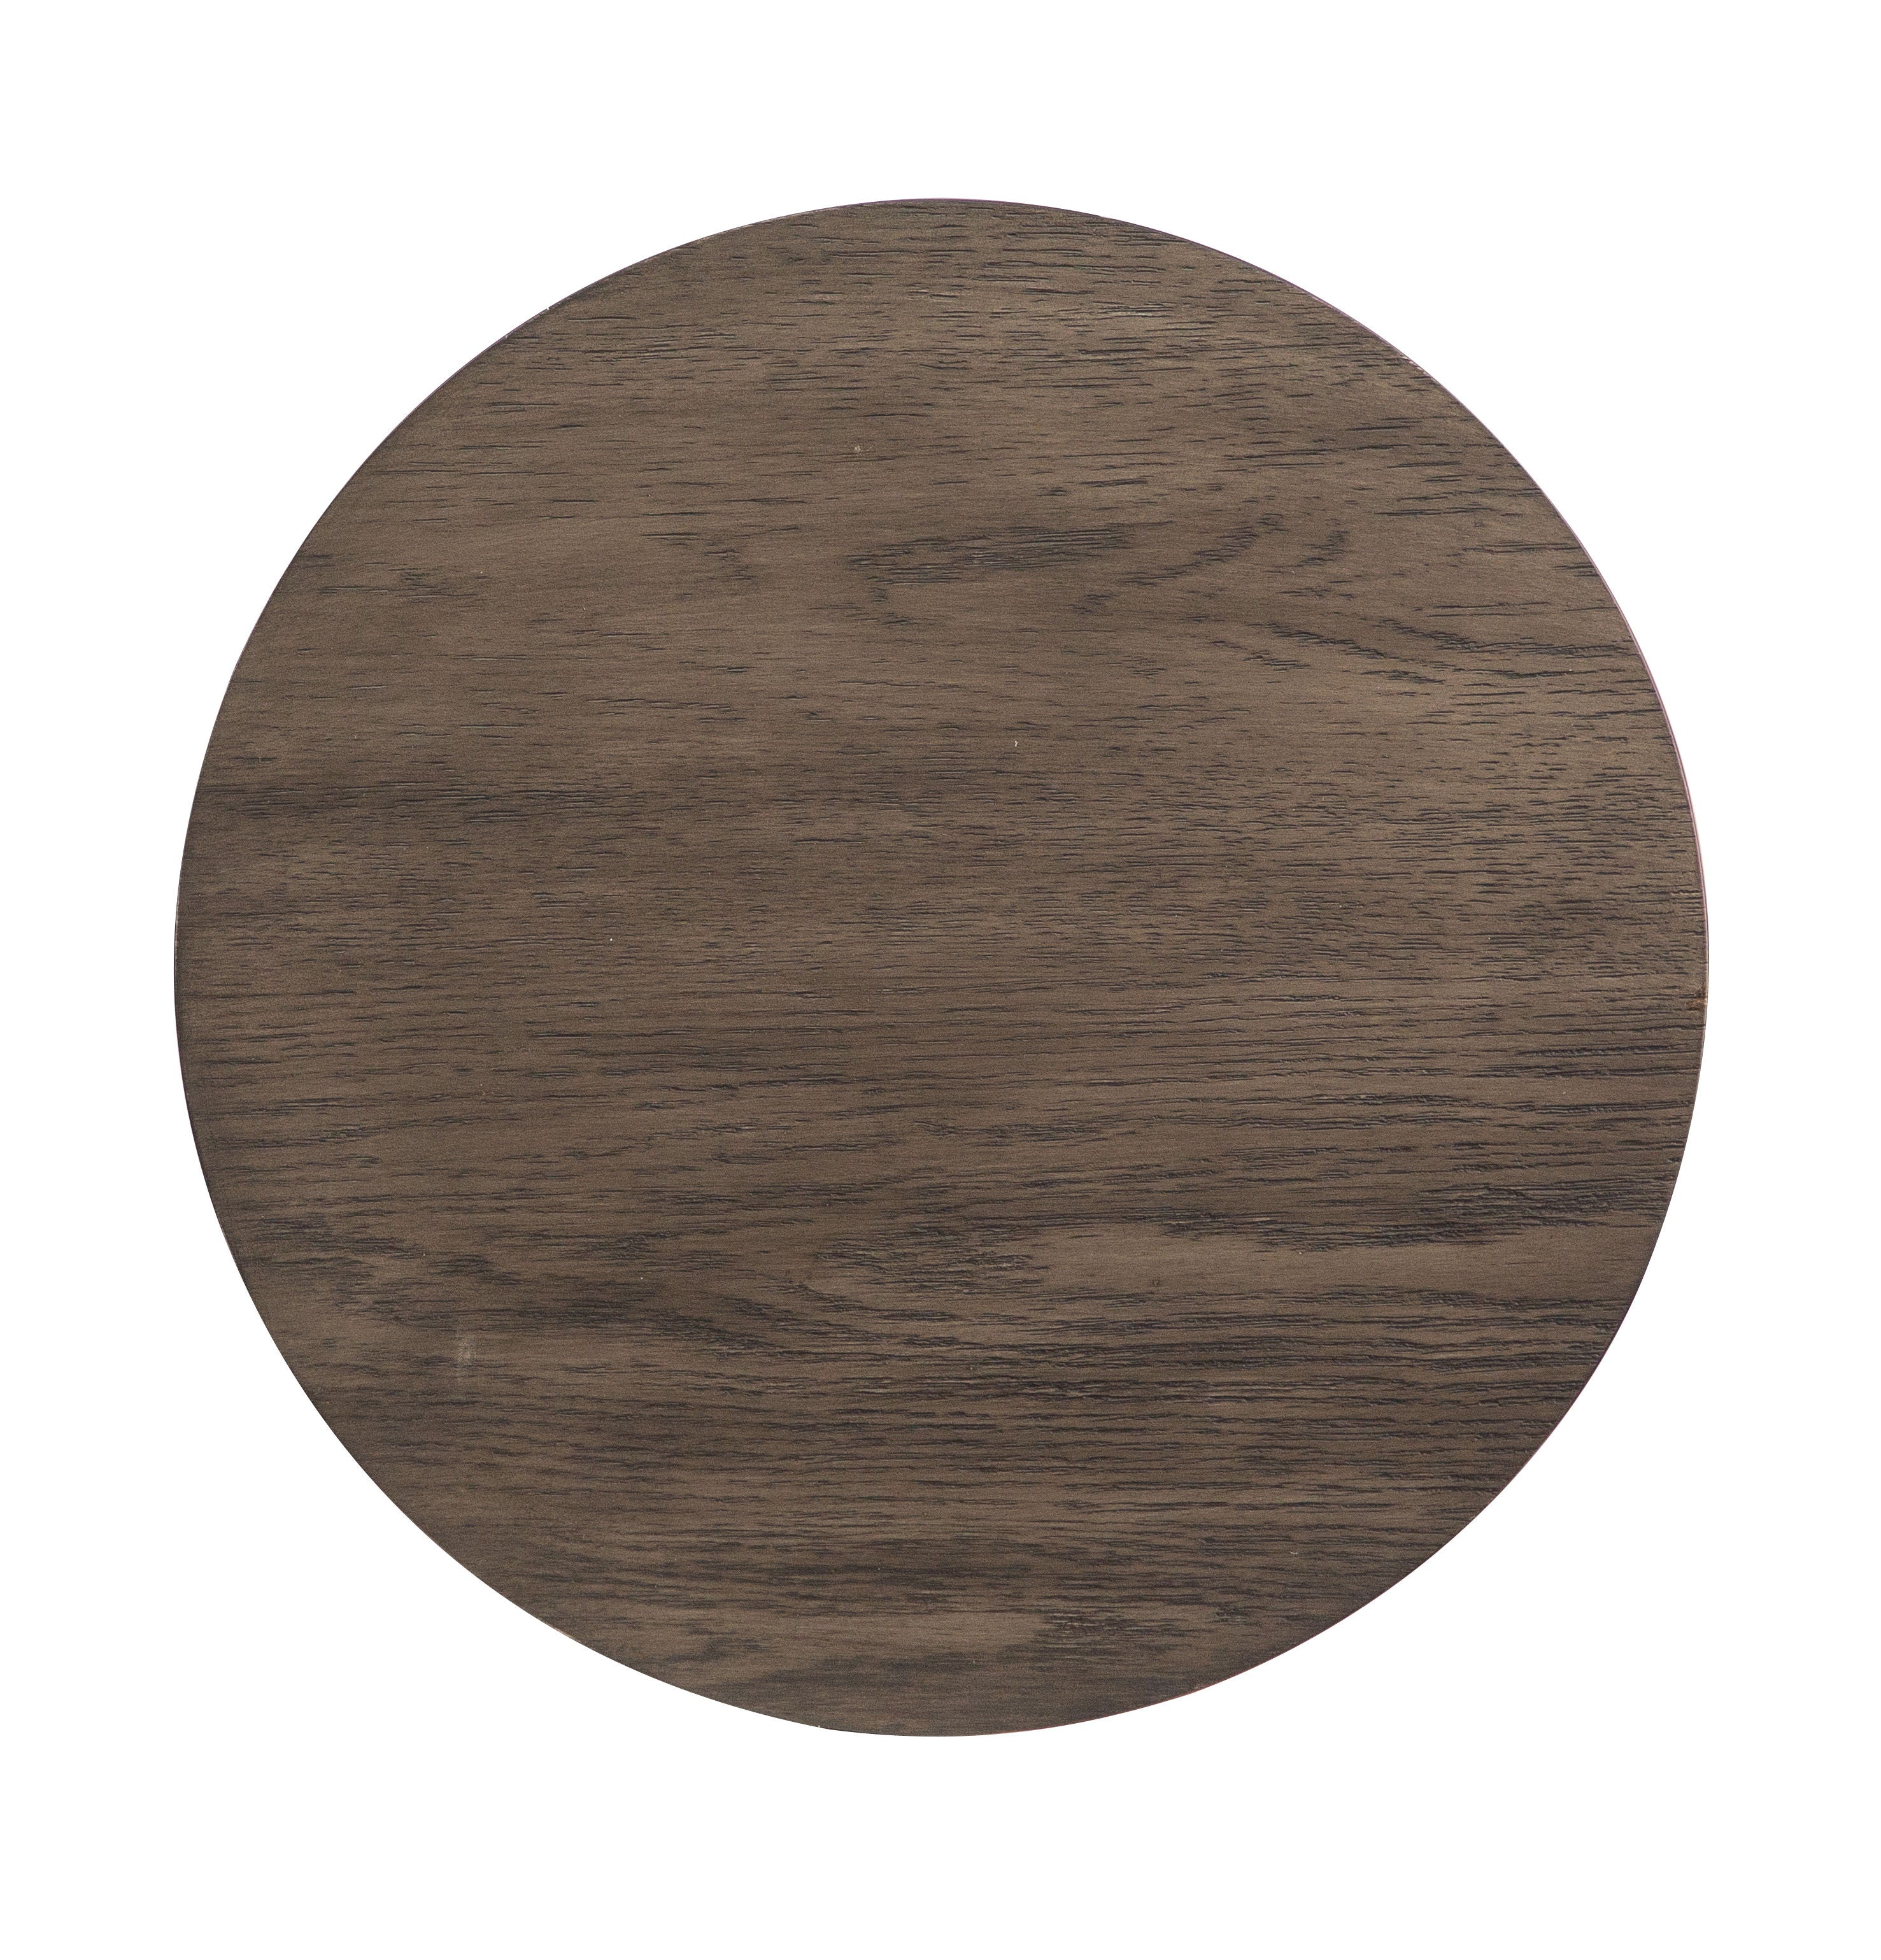 Bosley - Round Accent Table - Coffee Bean